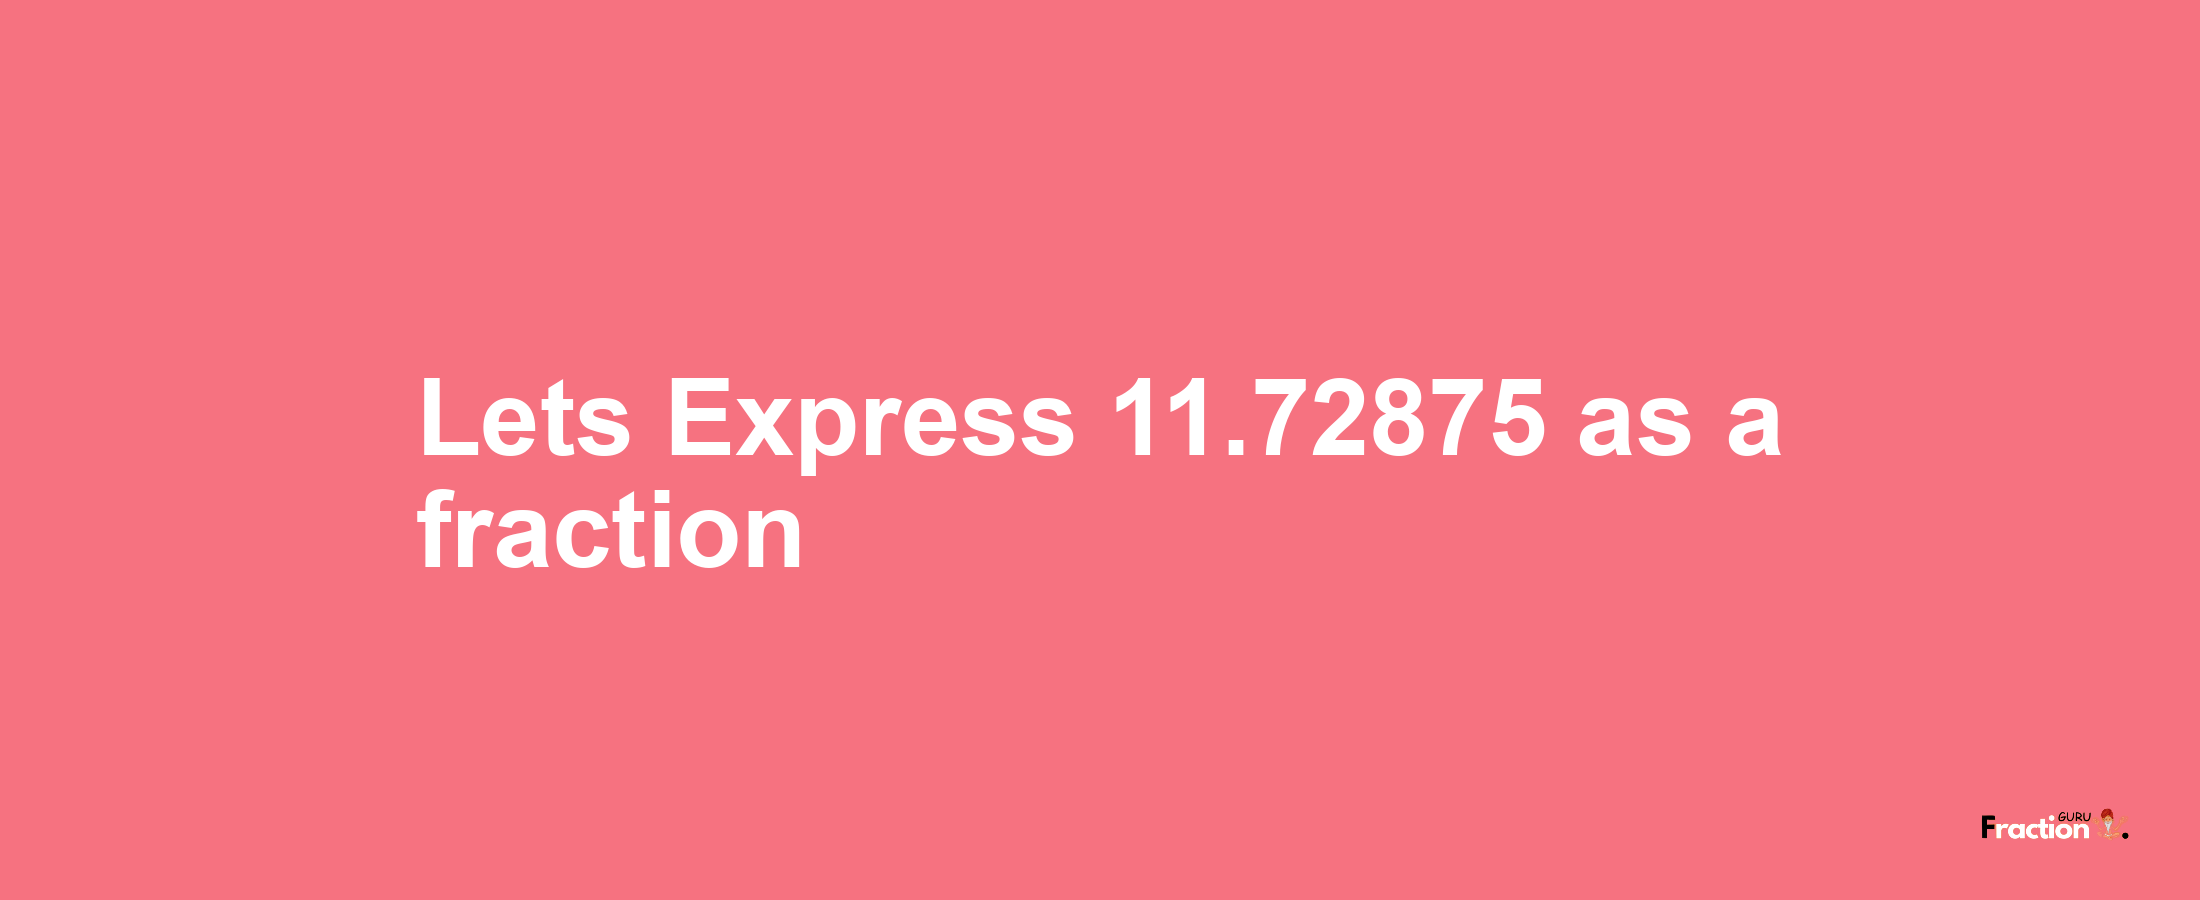 Lets Express 11.72875 as afraction